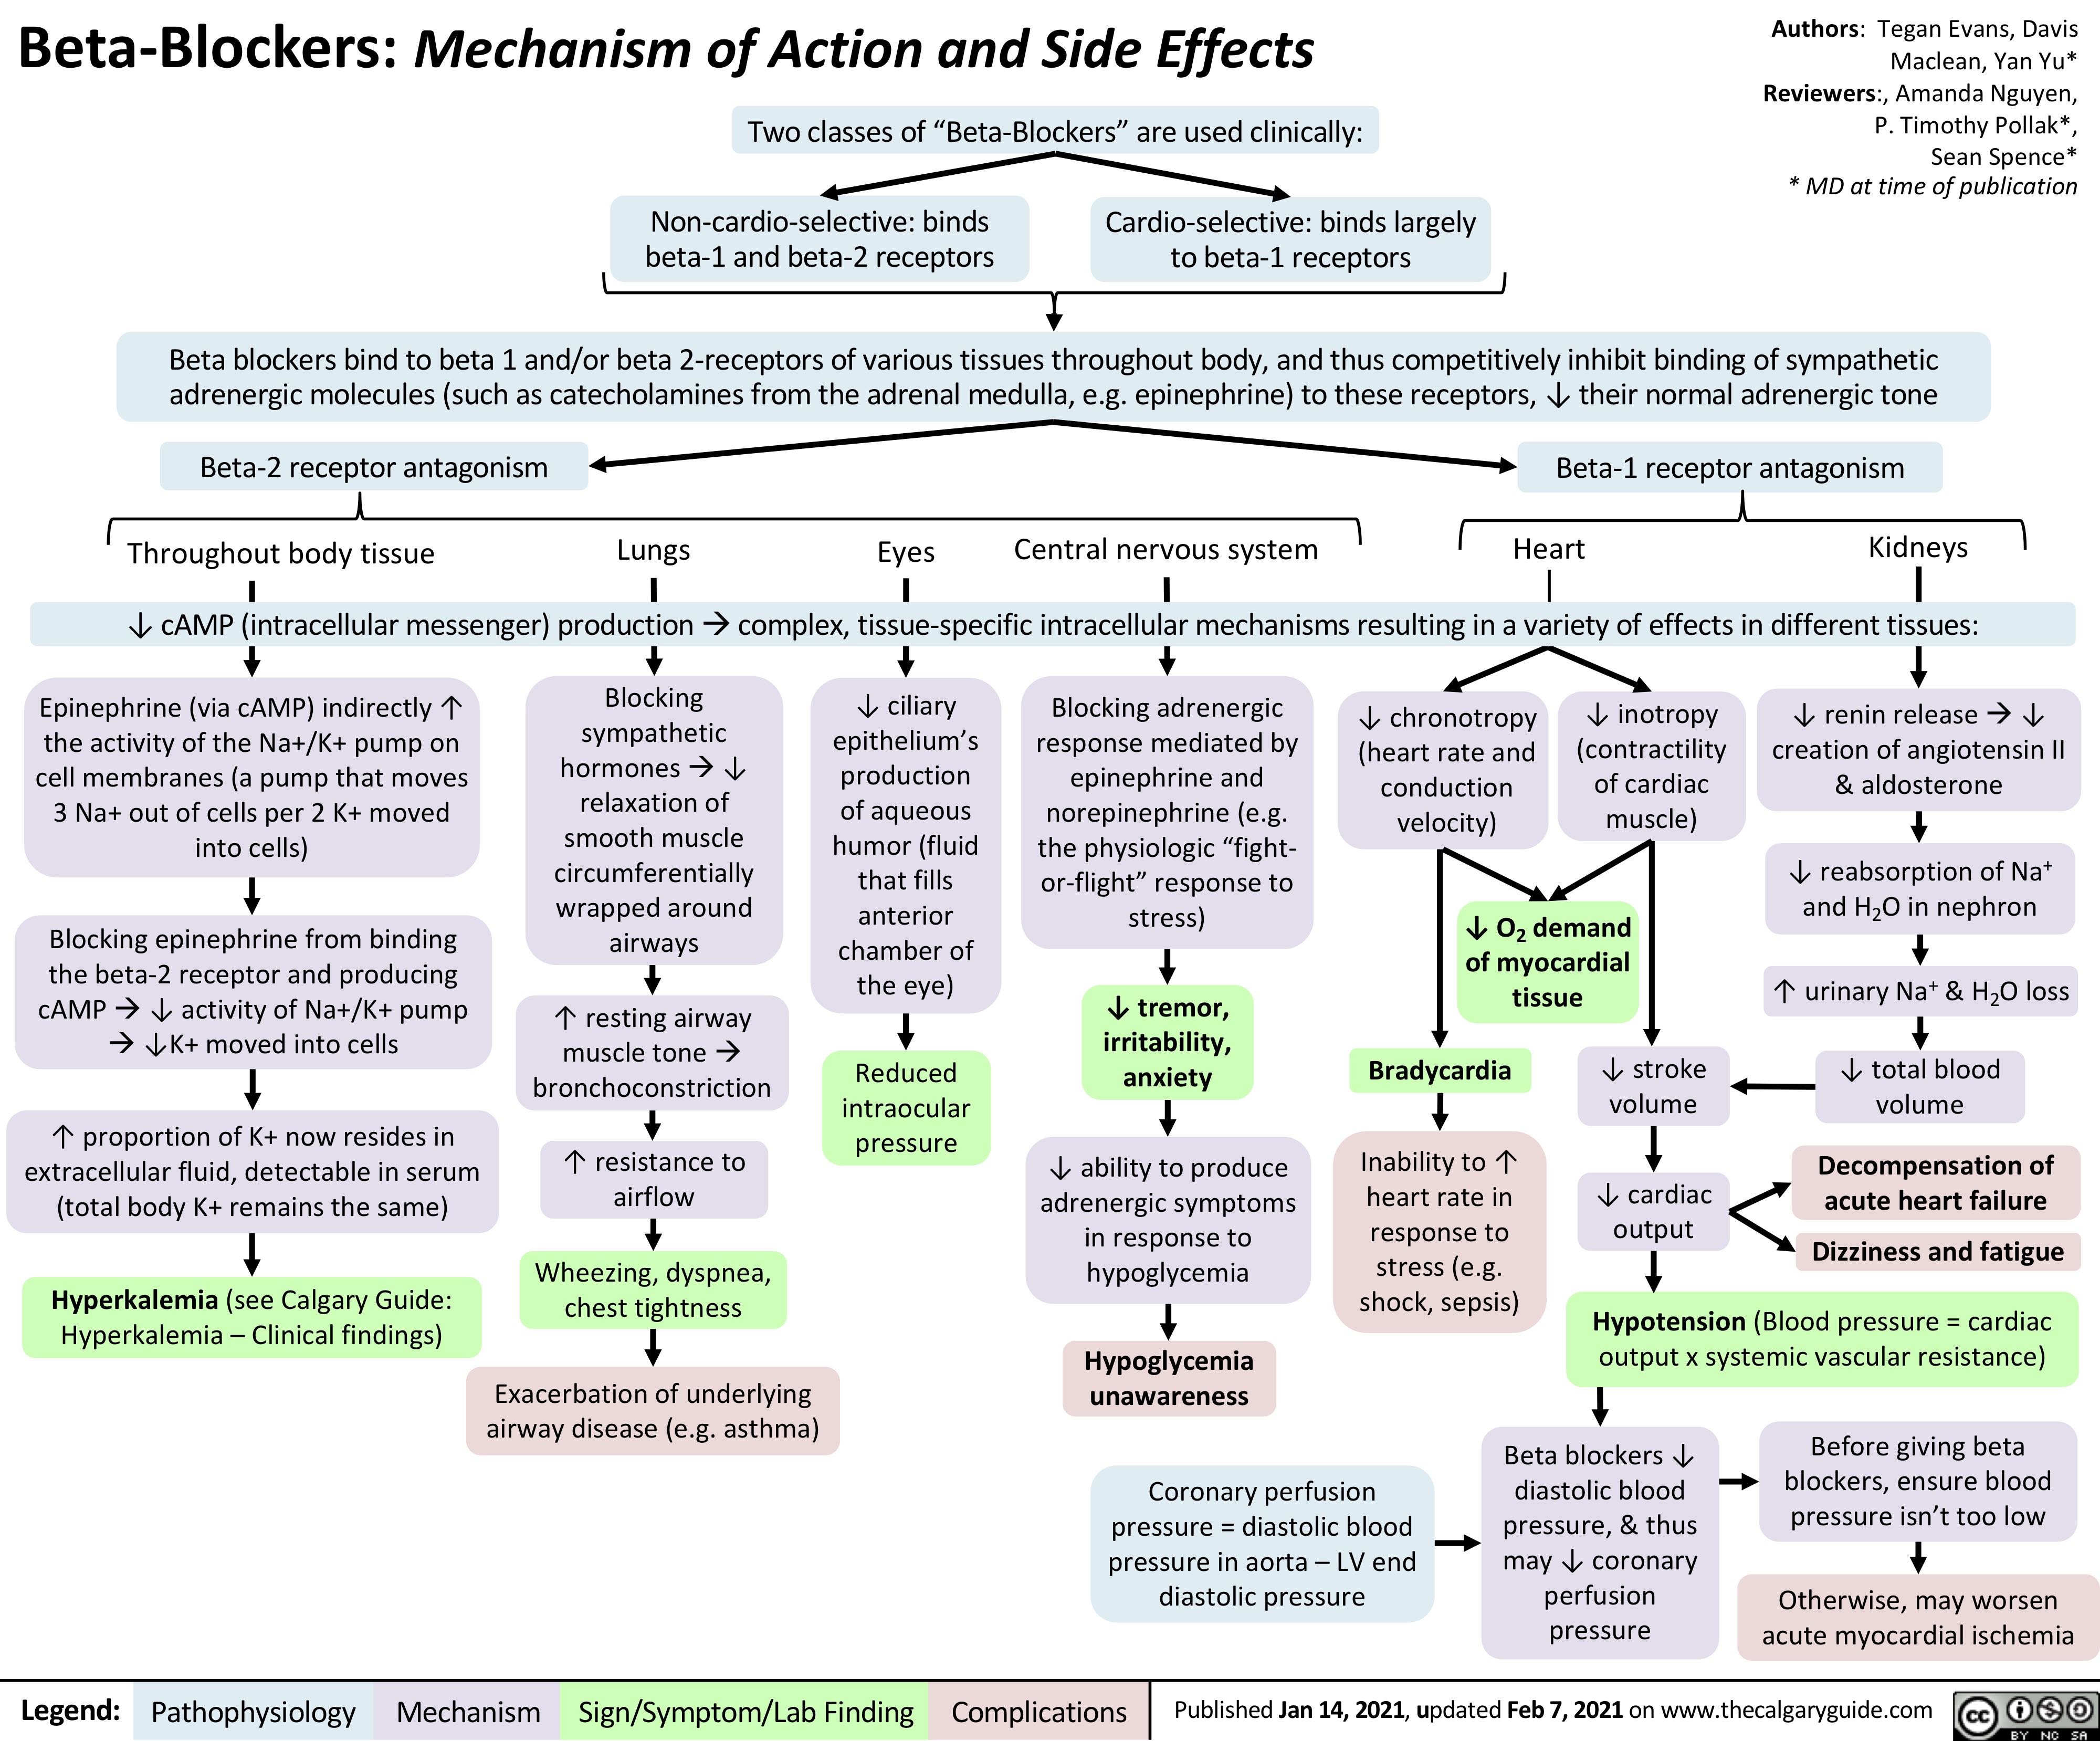 Beta-Blockers: Mechanism of Action and Side Effects Two classes of “Beta-Blockers” are used clinically:
Non-cardio-selective: binds Cardio-selective: binds largely beta-1 and beta-2 receptors to beta-1 receptors
Authors: Tegan Evans, Davis Maclean, Yan Yu* Reviewers:, Amanda Nguyen, P. Timothy Pollak*, Sean Spence* * MD at time of publication
        Beta blockers bind to beta 1 and/or beta 2-receptors of various tissues throughout body, and thus competitively inhibit binding of sympathetic adrenergic molecules (such as catecholamines from the adrenal medulla, e.g. epinephrine) to these receptors, ↓ their normal adrenergic tone
Beta-2 receptor antagonism Beta-1 receptor antagonism
      Lungs Eyes Central nervous system Heart Kidneys ↓ cAMP (intracellular messenger) productionàcomplex, tissue-specific intracellular mechanisms resulting in a variety of effects in different tissues:
Throughout body tissue
             Epinephrine (via cAMP) indirectly ↑ the activity of the Na+/K+ pump on cell membranes (a pump that moves 3 Na+ out of cells per 2 K+ moved into cells)
Blocking epinephrine from binding
the beta-2 receptor and producing cAMPà↓ activity of Na+/K+ pump à↓K+ moved into cells
↑ proportion of K+ now resides in extracellular fluid, detectable in serum (total body K+ remains the same)
Hyperkalemia (see Calgary Guide: Hyperkalemia – Clinical findings)
Blocking sympathetic hormonesà↓ relaxation of smooth muscle circumferentially wrapped around airways
↑ resting airway muscle toneà bronchoconstriction
↑ resistance to airflow
Wheezing, dyspnea, chest tightness
Exacerbation of underlying airway disease (e.g. asthma)
↓ ciliary epithelium’s production of aqueous humor (fluid that fills anterior chamber of the eye)
Reduced intraocular pressure
Blocking adrenergic response mediated by epinephrine and norepinephrine (e.g. the physiologic “fight- or-flight” response to stress)
↓ tremor, irritability, anxiety
↓ ability to produce adrenergic symptoms in response to hypoglycemia
Hypoglycemia unawareness
Coronary perfusion pressure = diastolic blood pressure in aorta – LV end diastolic pressure
↓ inotropy (contractility of cardiac muscle)
  ↓ chronotropy (heart rate and conduction velocity)
↓ renin releaseà↓ creation of angiotensin II & aldosterone
+ ↓ reabsorption of Na
and H2O in nephron
↑ urinary Na+ & H2O loss
↓ total blood volume
Decompensation of acute heart failure
Dizziness and fatigue Hypotension (Blood pressure = cardiac
output x systemic vascular resistance)
        ↓ O2 demand of myocardial tissue
             Bradycardia
Inability to ↑ heart rate in response to stress (e.g. shock, sepsis)
↓ stroke volume
            ↓ cardiac output
               Beta blockers ↓ diastolic blood pressure, & thus may ↓ coronary perfusion pressure
Before giving beta blockers, ensure blood pressure isn’t too low
Otherwise, may worsen acute myocardial ischemia
      Legend:
 Pathophysiology
Mechanism
 Sign/Symptom/Lab Finding
  Complications
 Published Jan 14, 2021, updated Feb 7, 2021 on www.thecalgaryguide.com
  